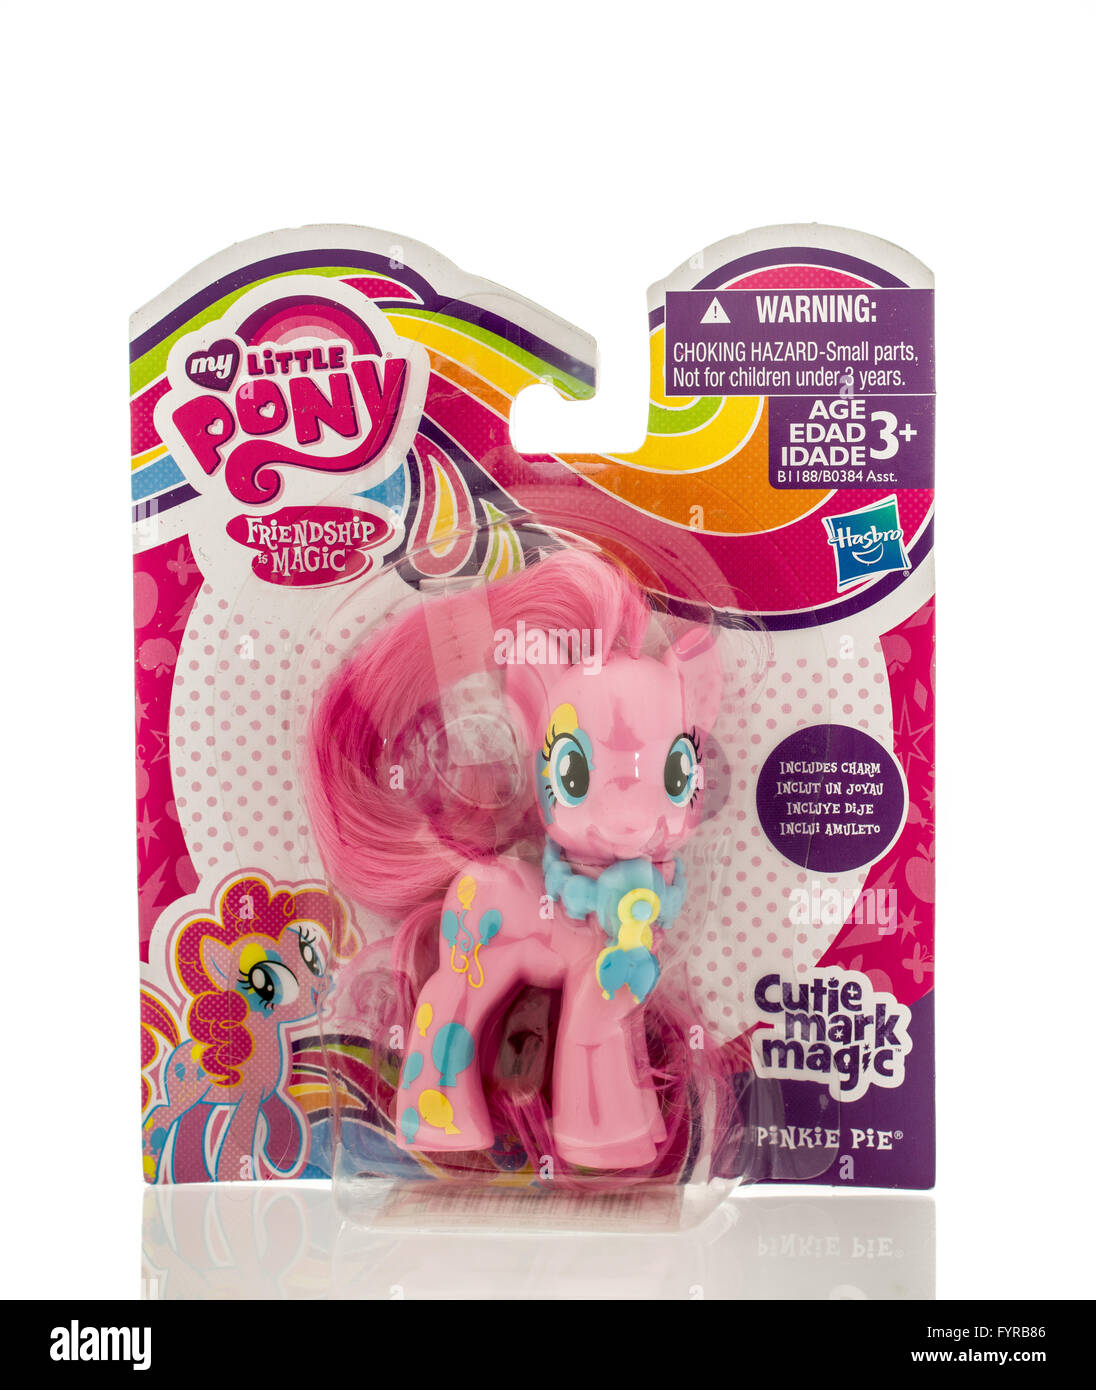 https://c8.alamy.com/comp/FYRB86/winneconne-wi-4-march-2016-a-package-of-my-little-pony-made-by-hasbro-FYRB86.jpg